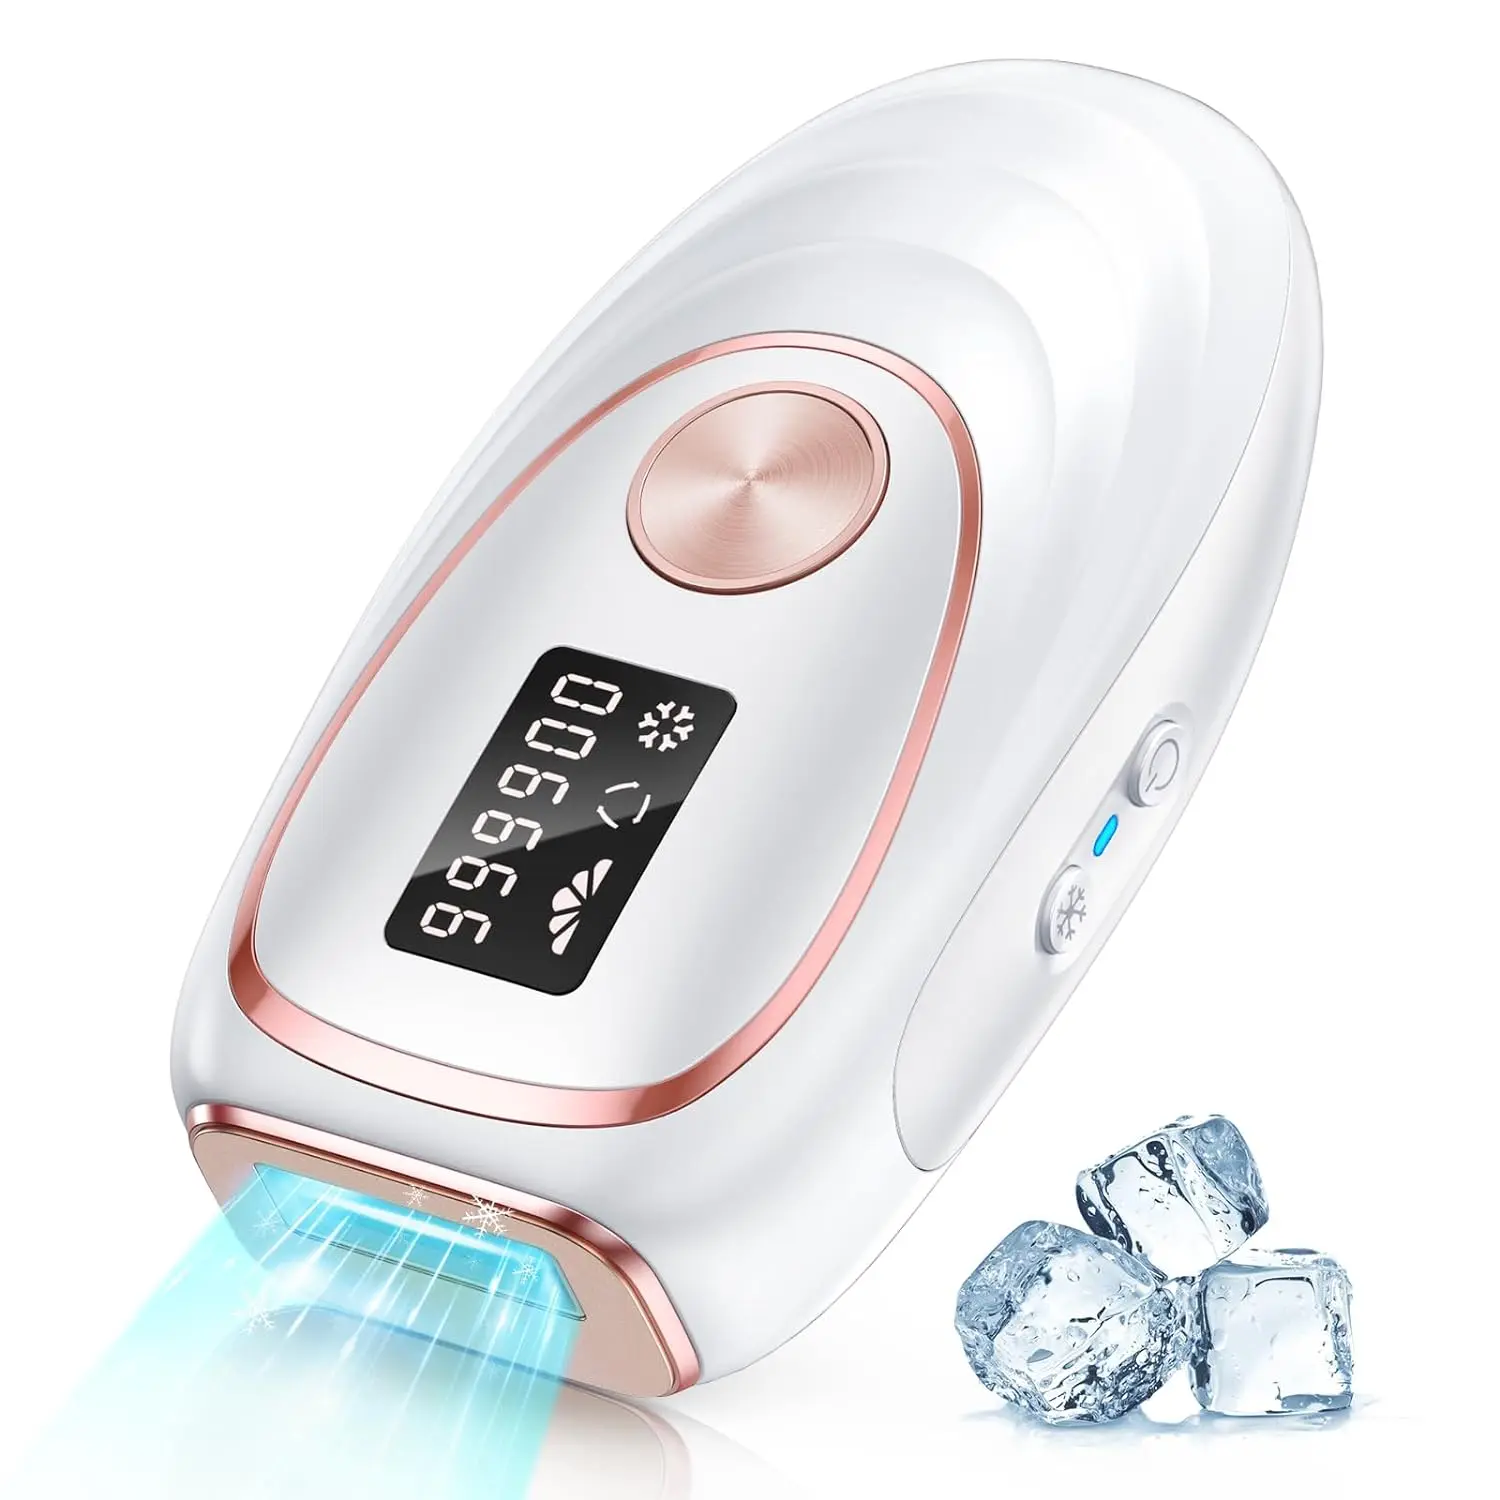 

IPL Hair Removal Ice Cooling Women Men Upgraded 999,900 Flashes 5 Levels Permanent whole body Hair Removal Device Laser Epilator